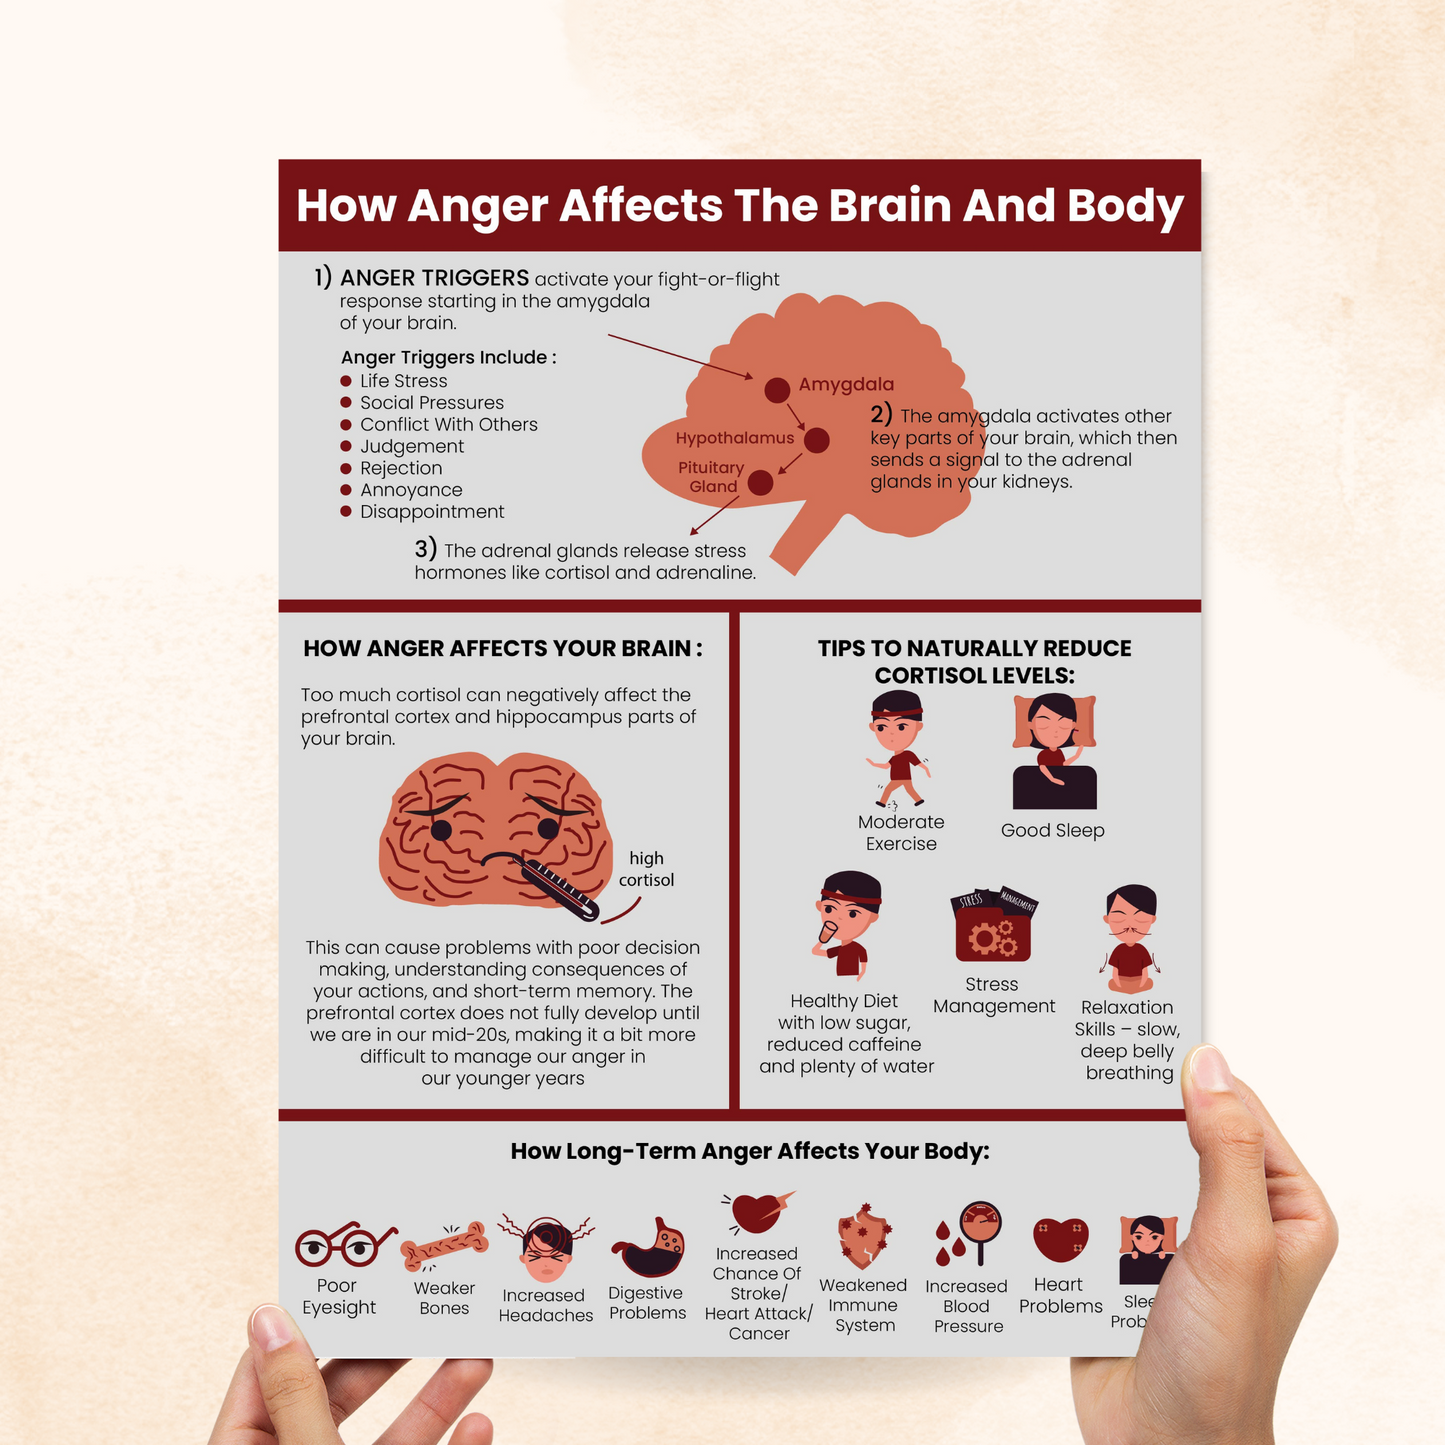 How Anger Affects the Brain and Body